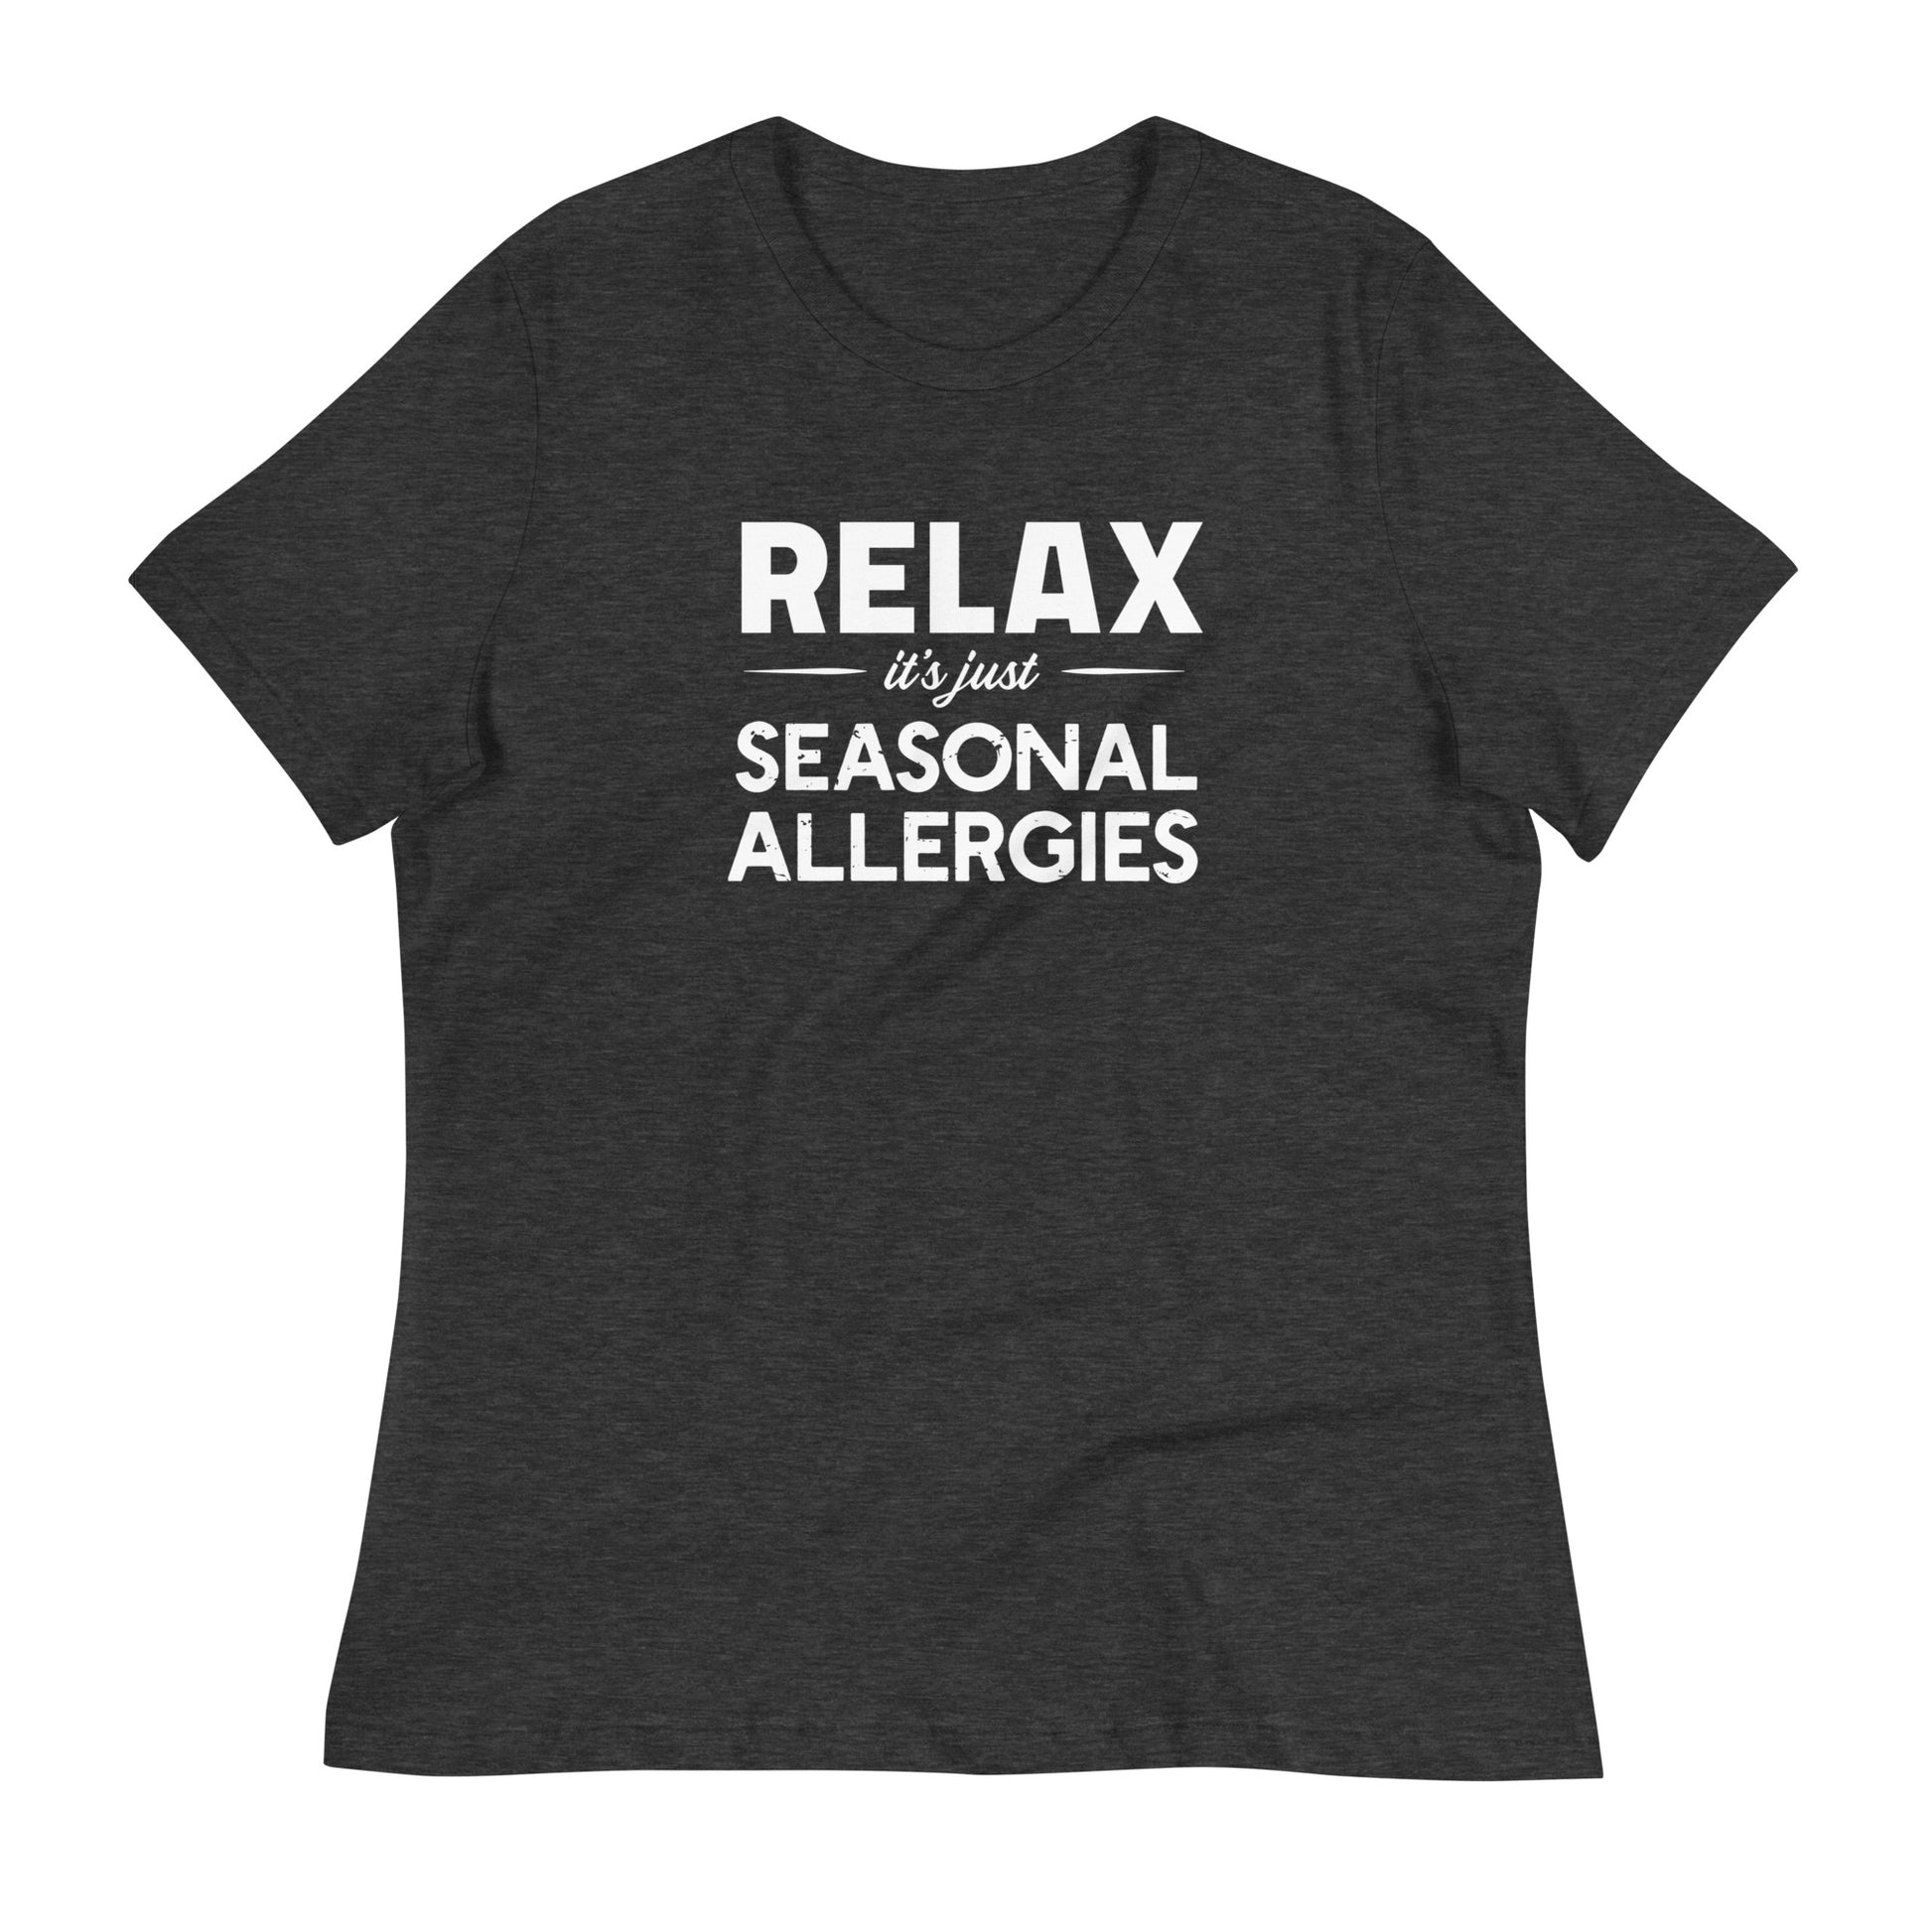 Dark Grey Heather women's relaxed fit t-shirt with white graphic: "RELAX it's just SEASONAL ALLERGIES"